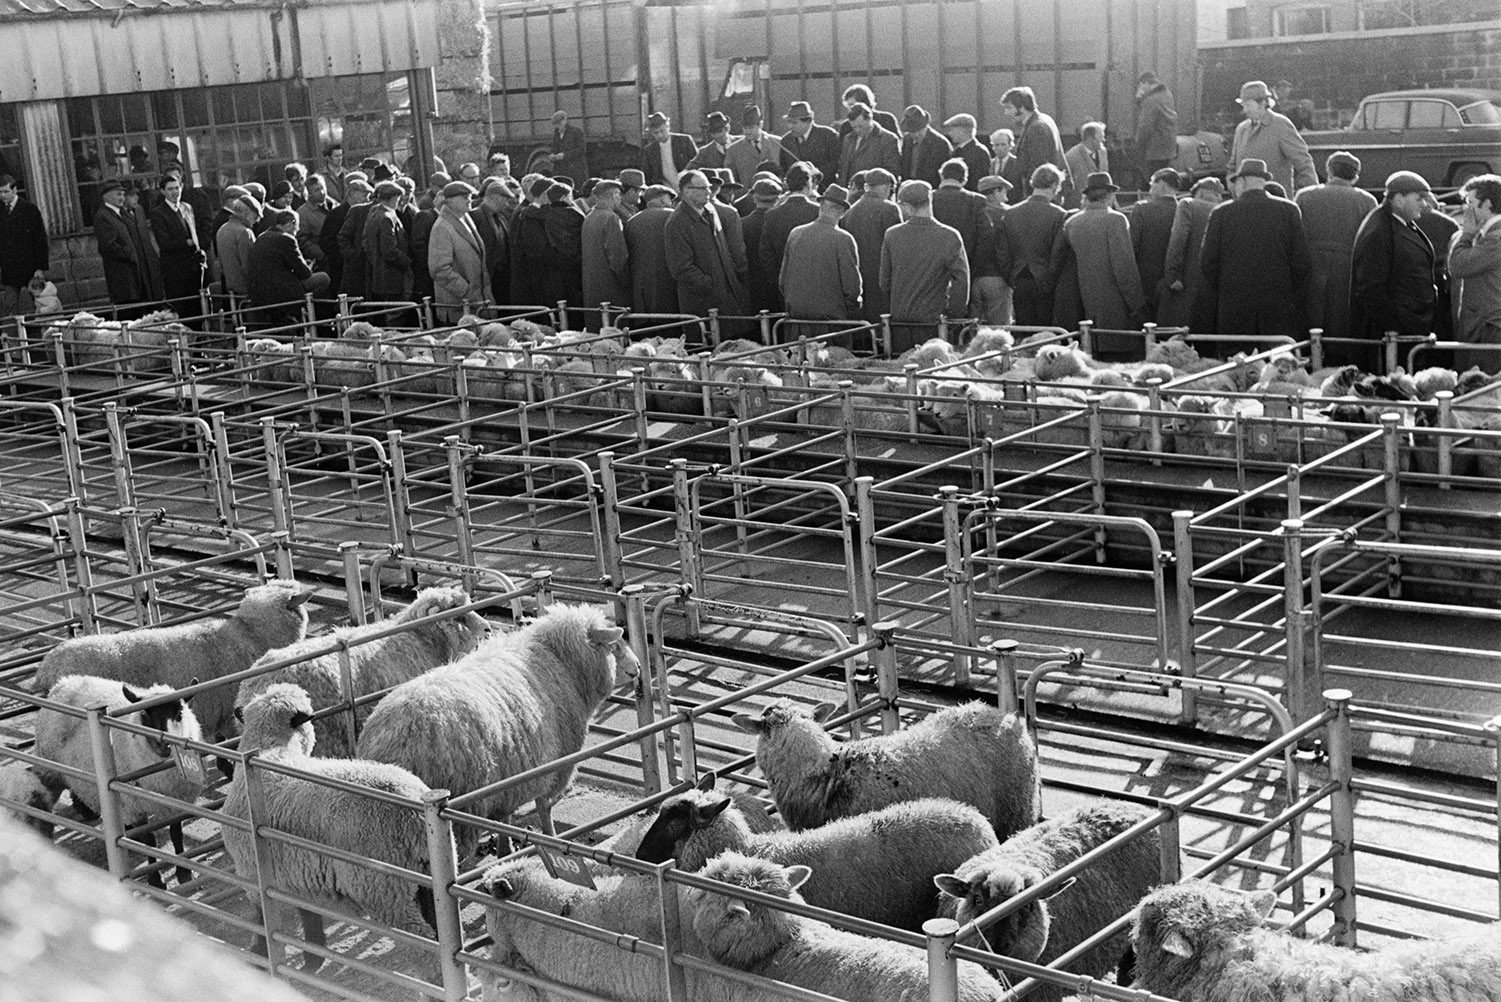 Livestock auction at Barnstaple. A crowd of men are looking at sheep in pens.